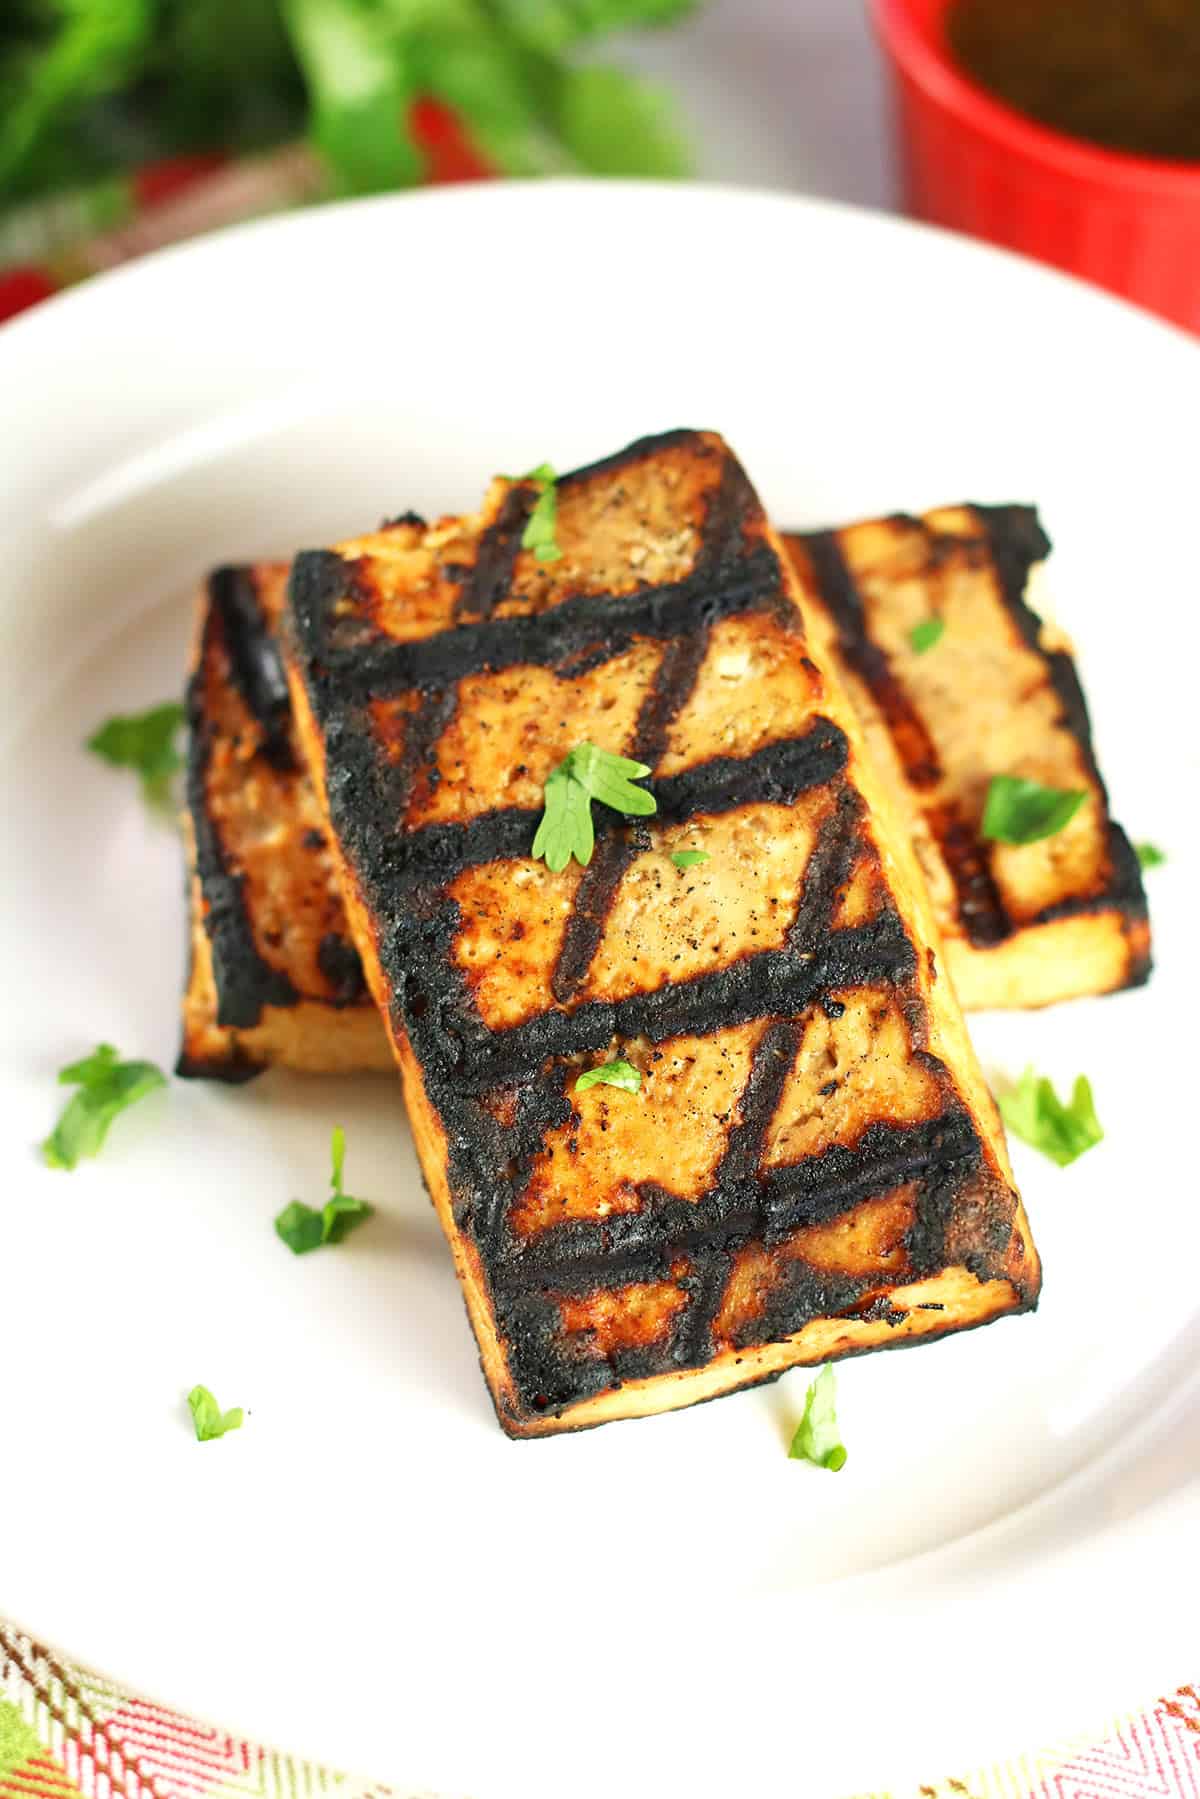 close up of grilled tofu steak showing cross-hatching from the grill.